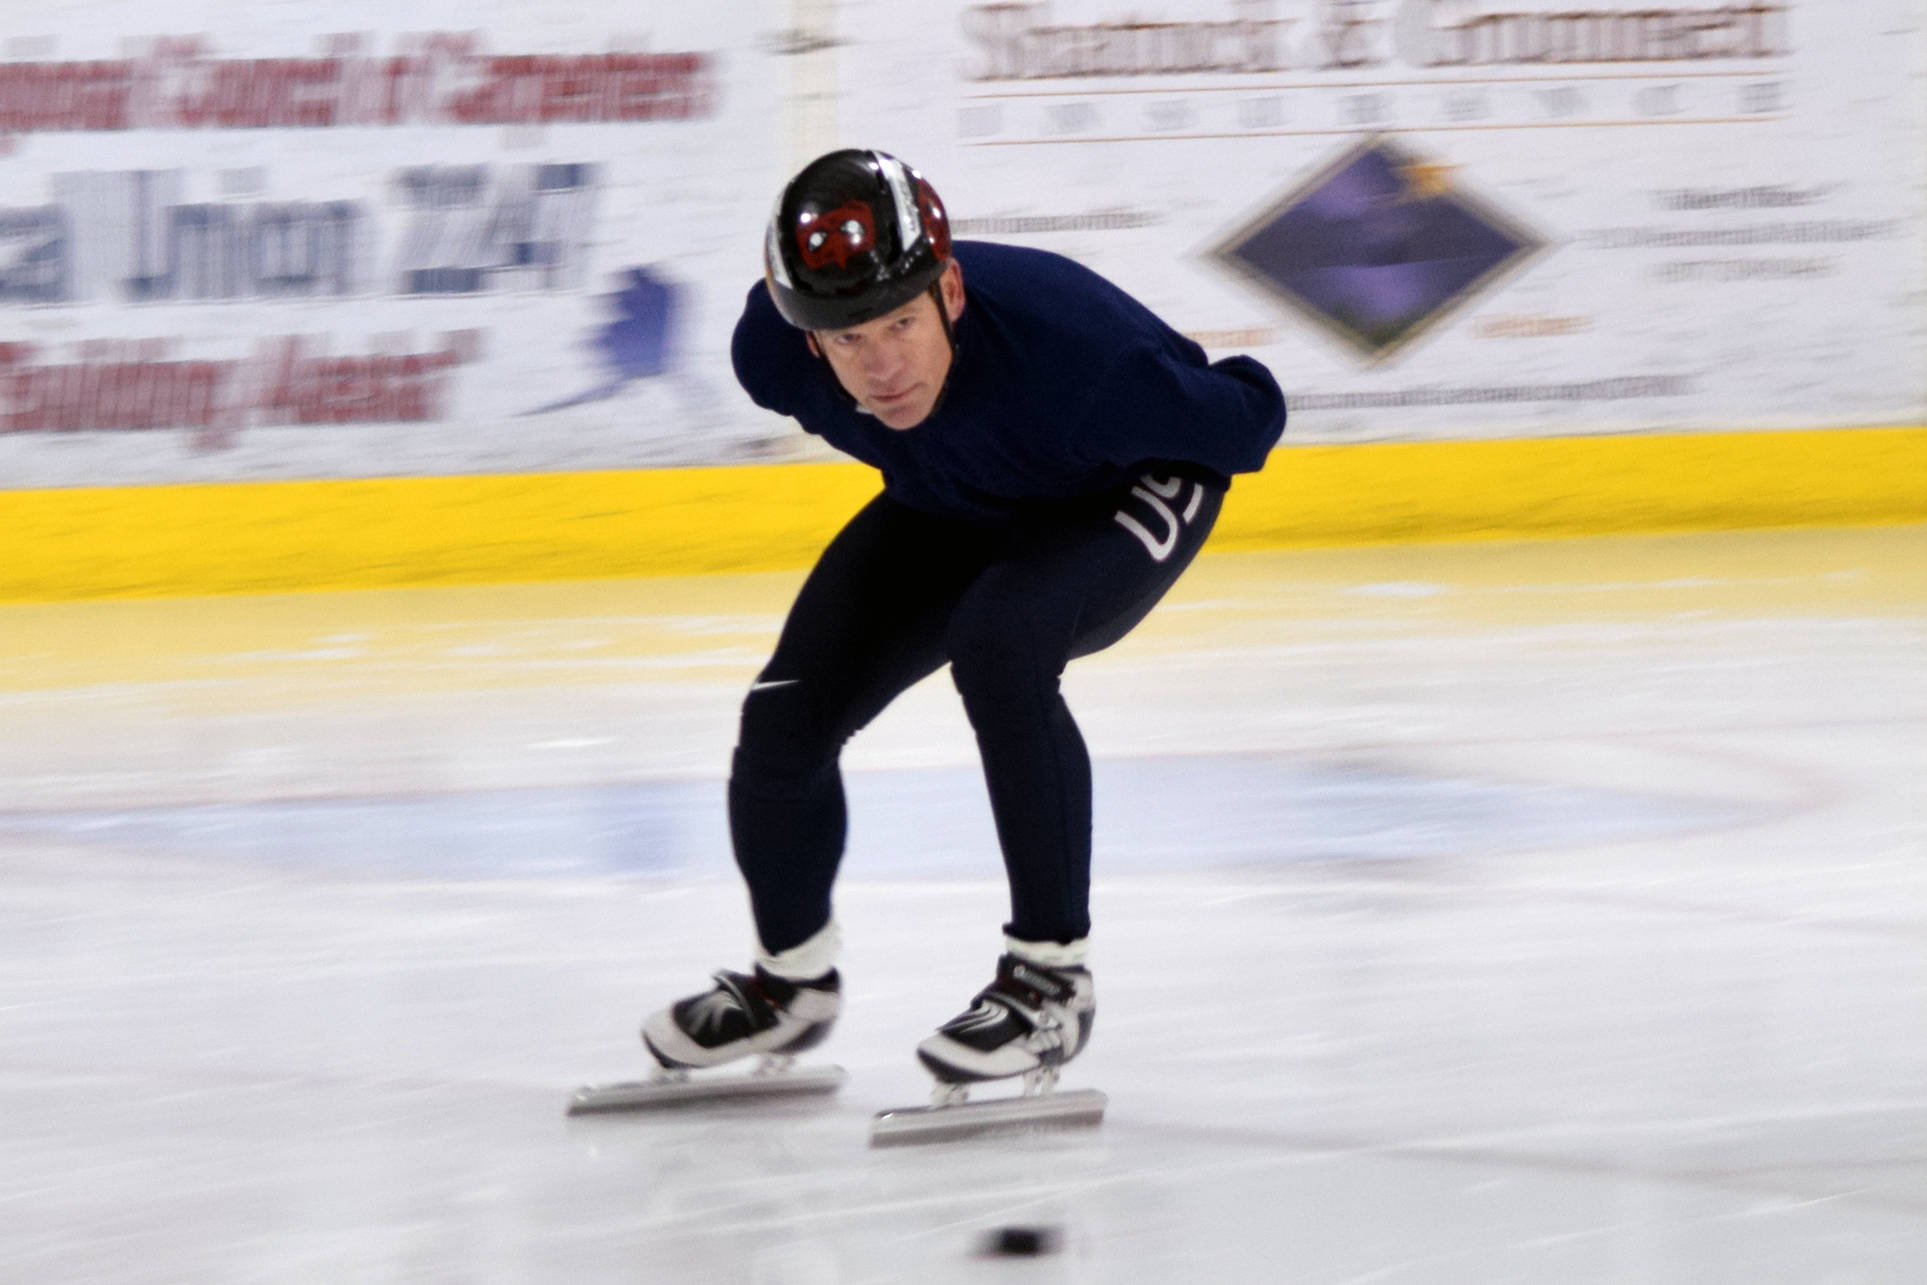 Michael Keye-Schuler leads a speed skating clinic at Treadwell Arena on Nov. 30, 2019. Keye-Schuler co-hosted Juneau’s first-ever short-track speed skating class with former competitive speed skater Andrew Dyke of Michigan on Nov. 24, 30 and Dec. 1. (Nolin Ainsworth | Juneau Empire)